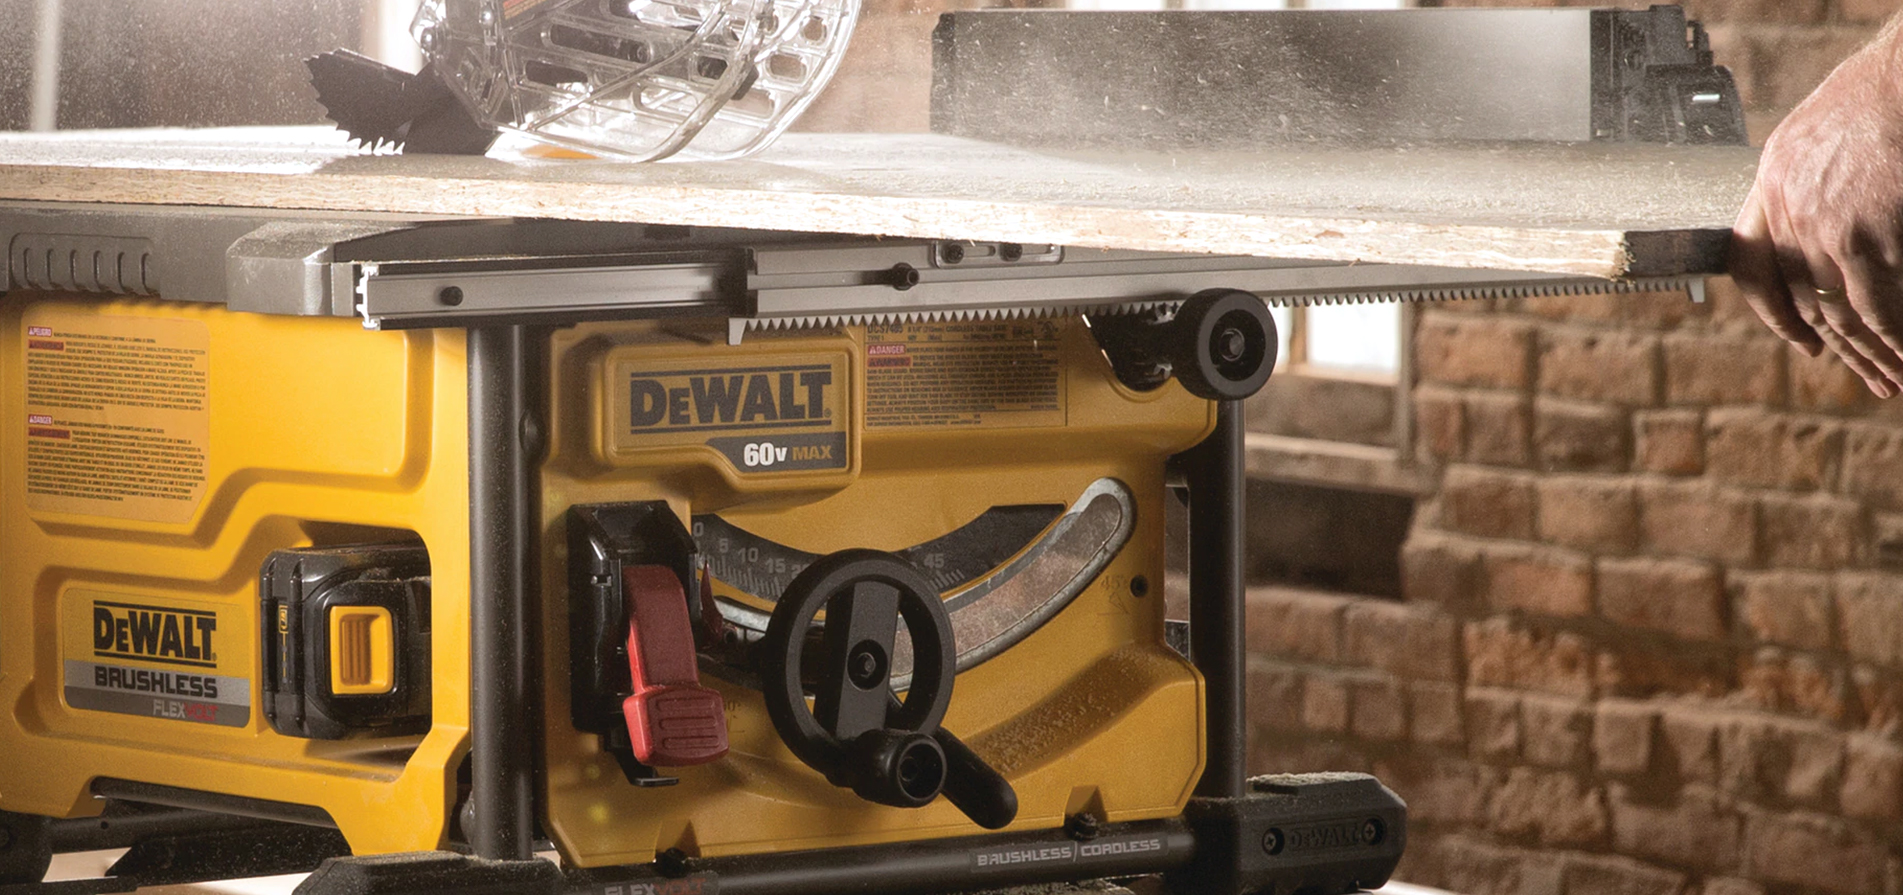 How to change the blade on a dewalt table saw Best Dewalt Table Saw In 2021 Detailed Reviews Guide